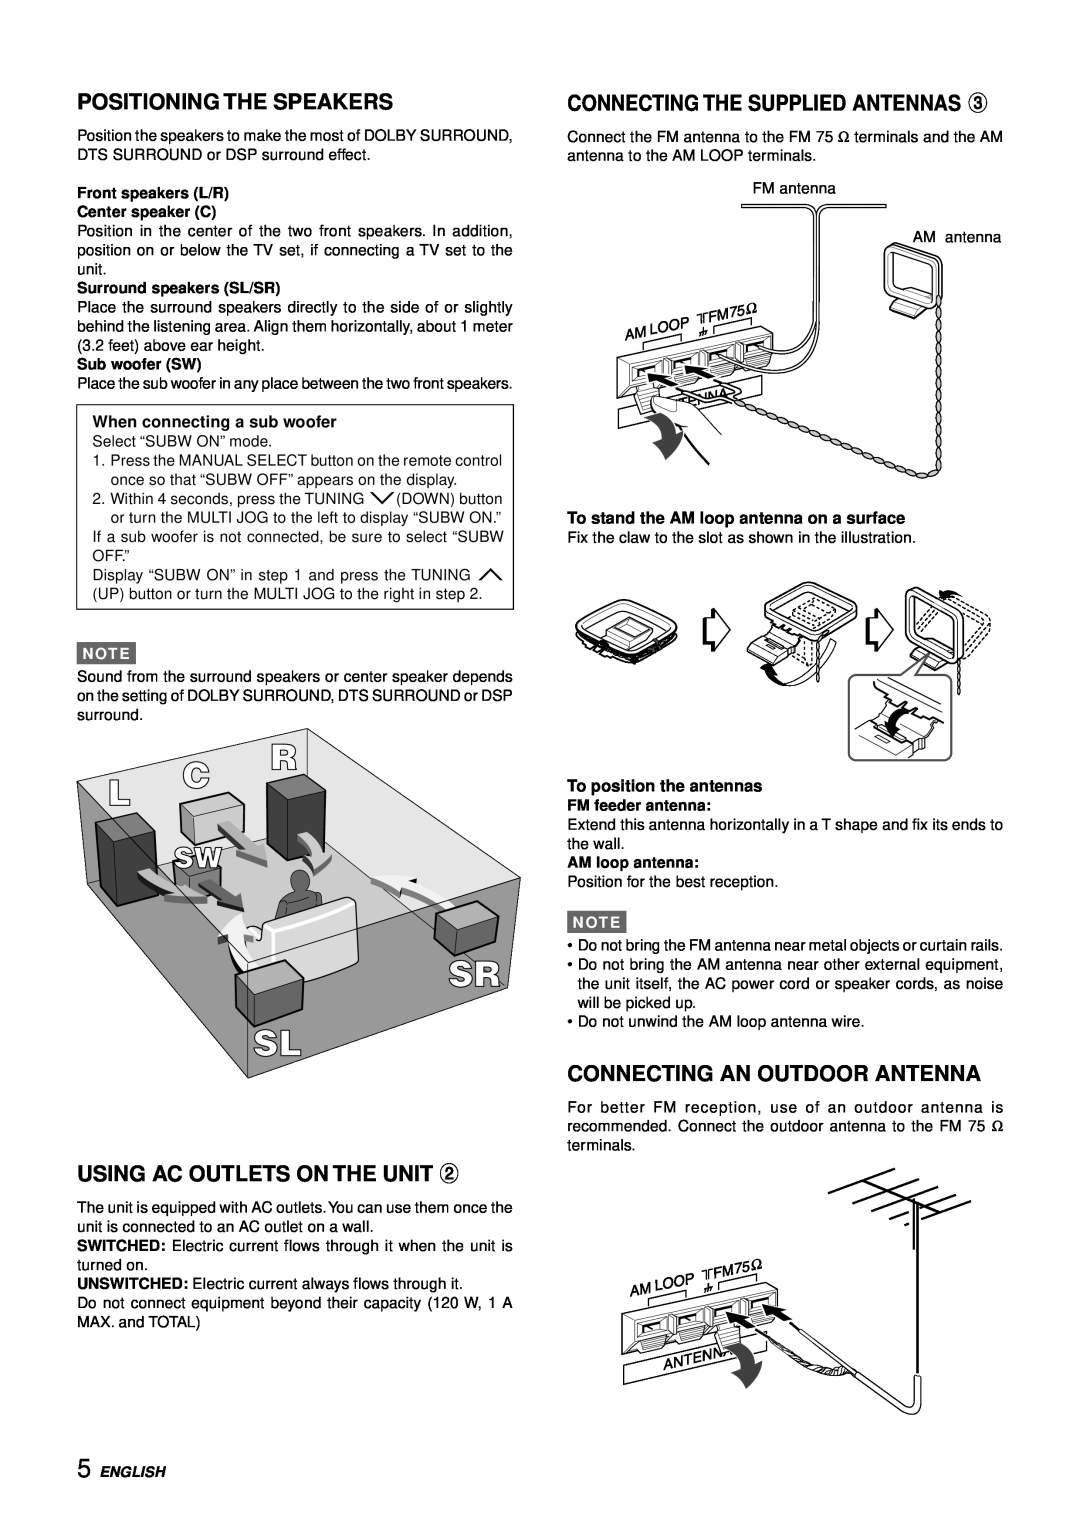 Aiwa AV-D97 manual Positioning The Speakers, Using Ac Outlets On The Unit, Connecting The Supplied Antennas, Sub woofer SW 